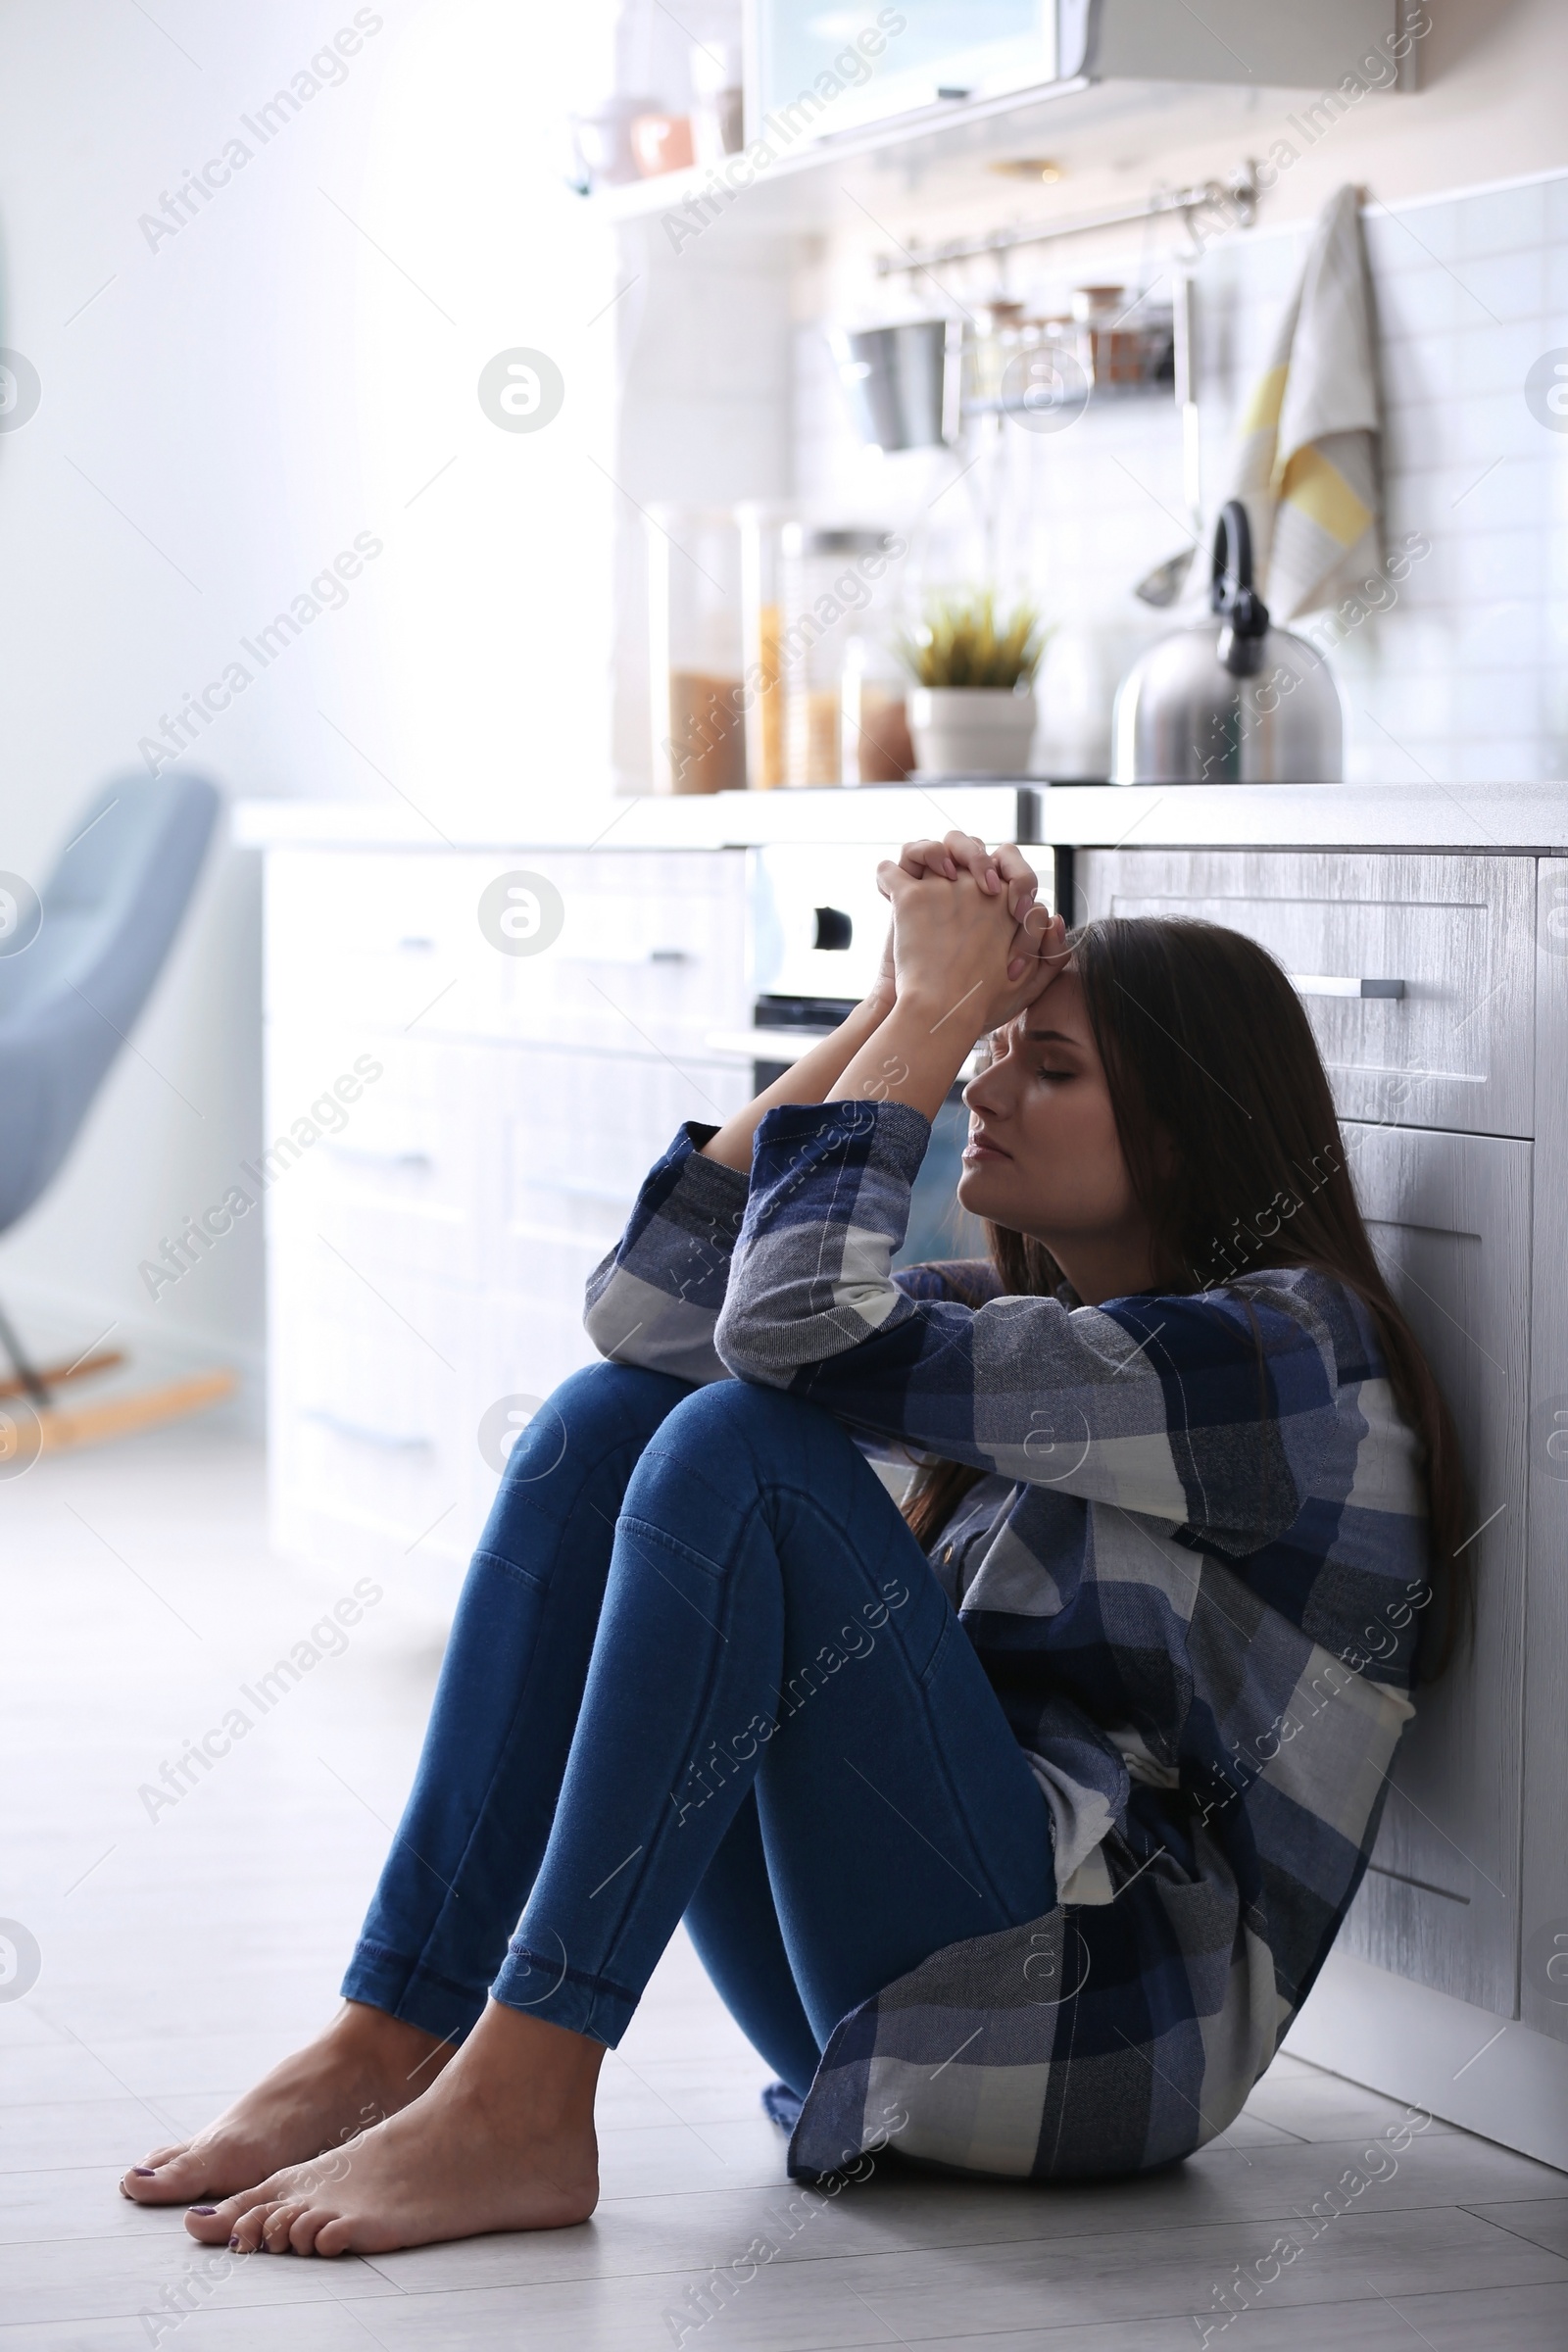 Photo of Depressed young woman sitting on floor in kitchen